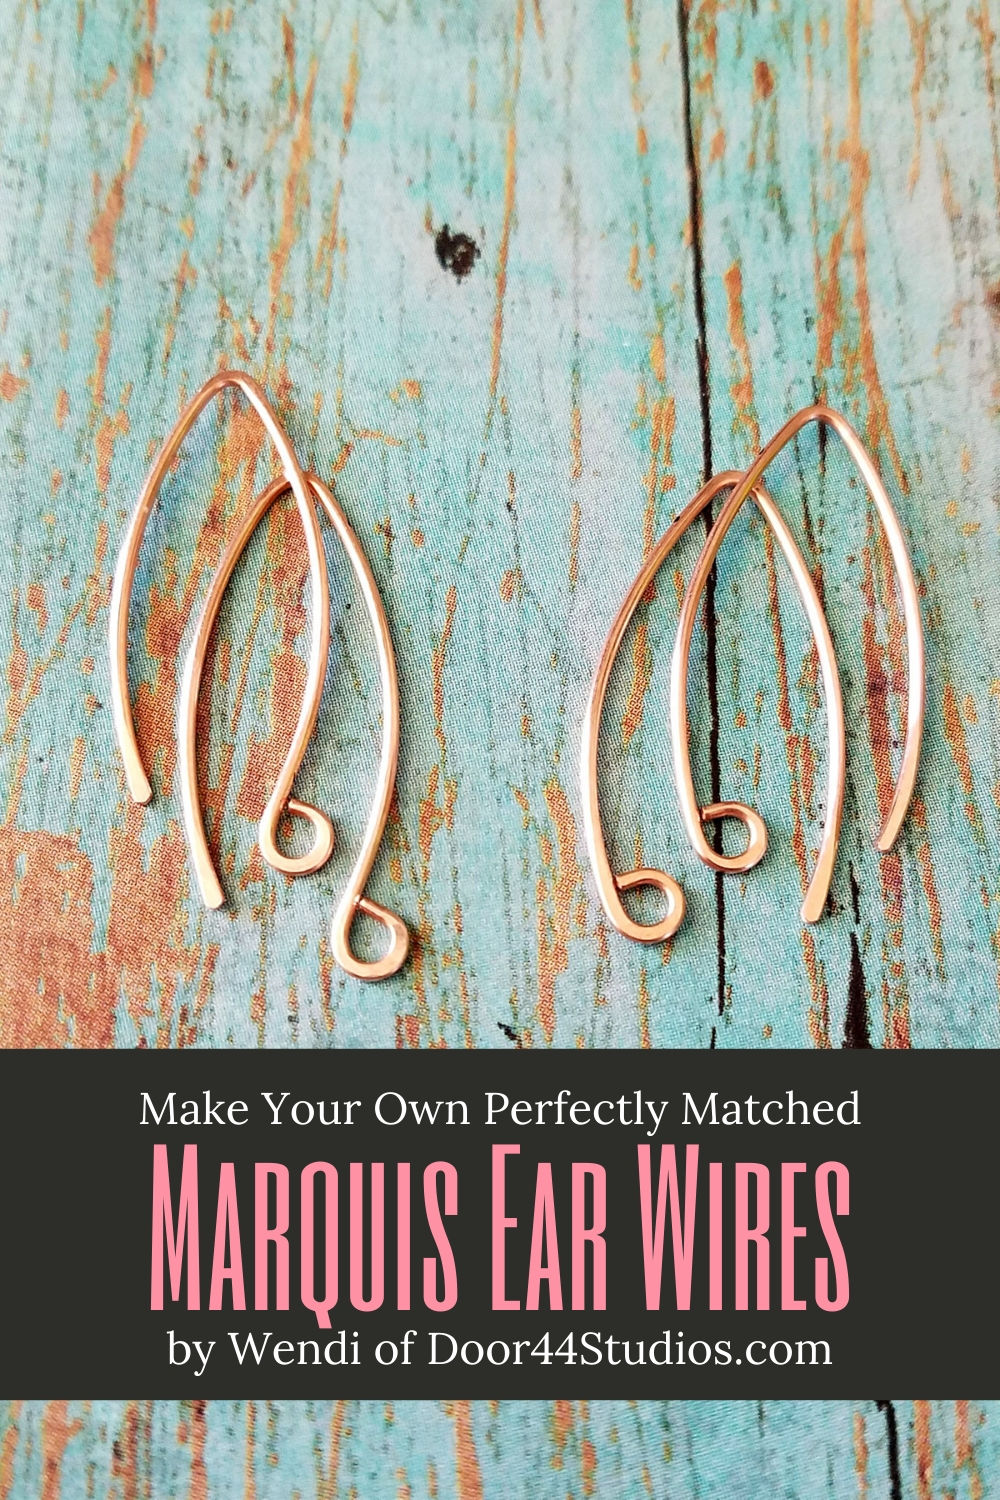 Learn to make perfectly matched Marquis ear wires with this fun and easy wirework basics tutorial by Wendi of Door 44 Studios. This is Part 1 of a 3-part series that guides you through the process of making fun and flirty beaded earrings. From scratch! 